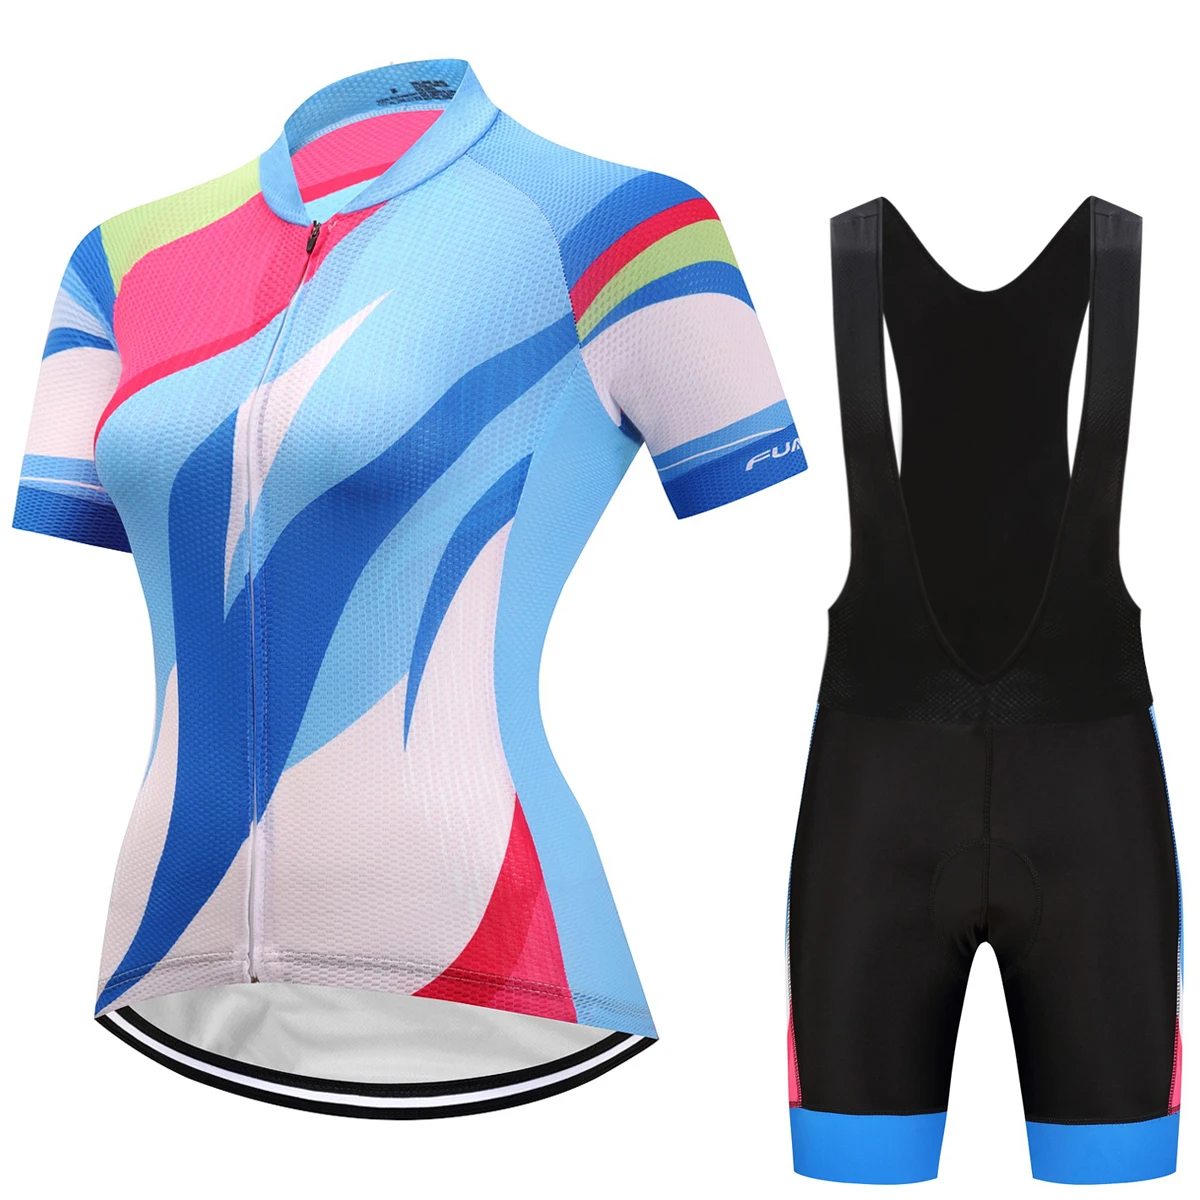 Фото 2018 Colombia Breathable Cycling Jersey 9D bib Set MTB Bike Clothing Bicycle Clothes Women's Short Maillot Culotte | Спорт и